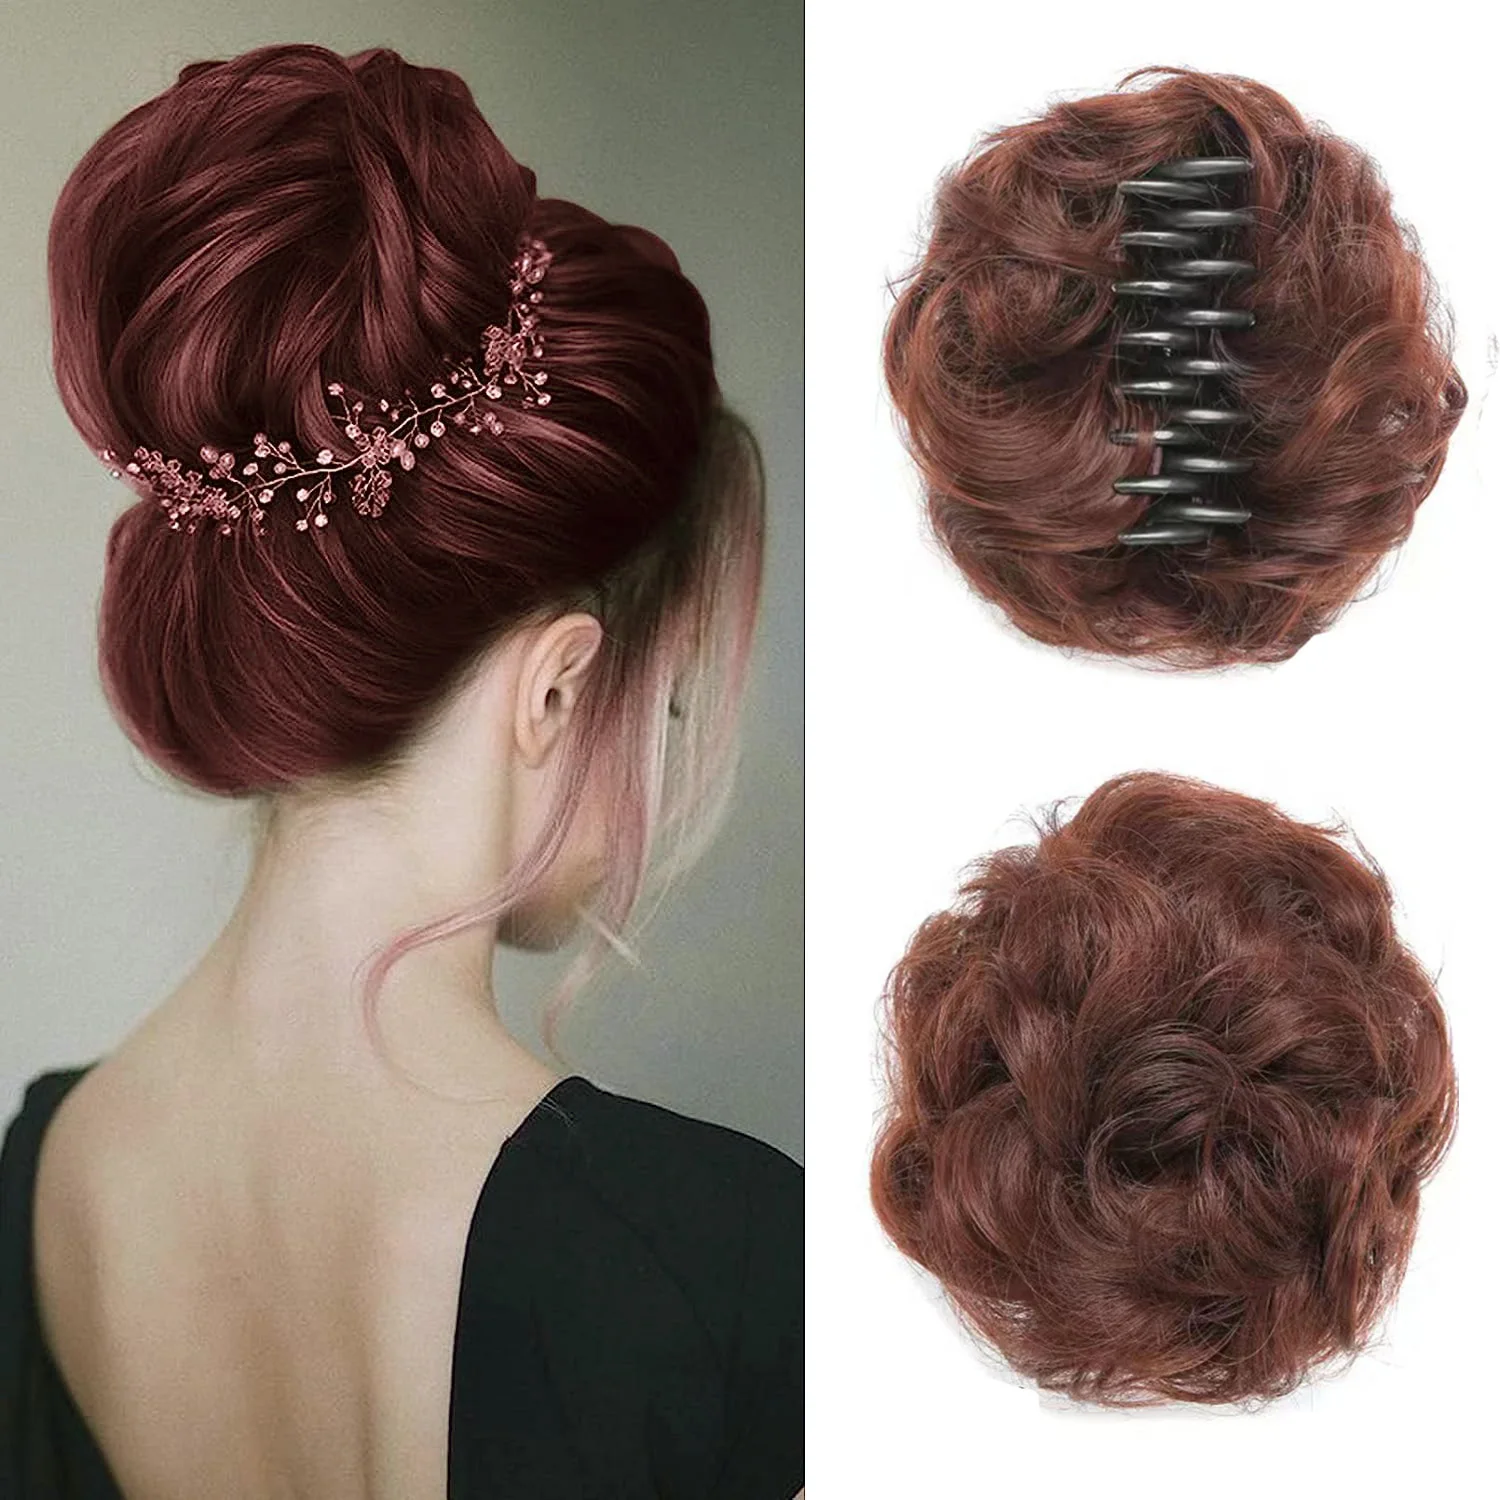 

Claw Clip Messy Bun Hairpiece 1pc Curly Messy Hair Bun Clip in Claw Chignon Ponytail Hairpieces Synthetic Hair Bun Scrunchies